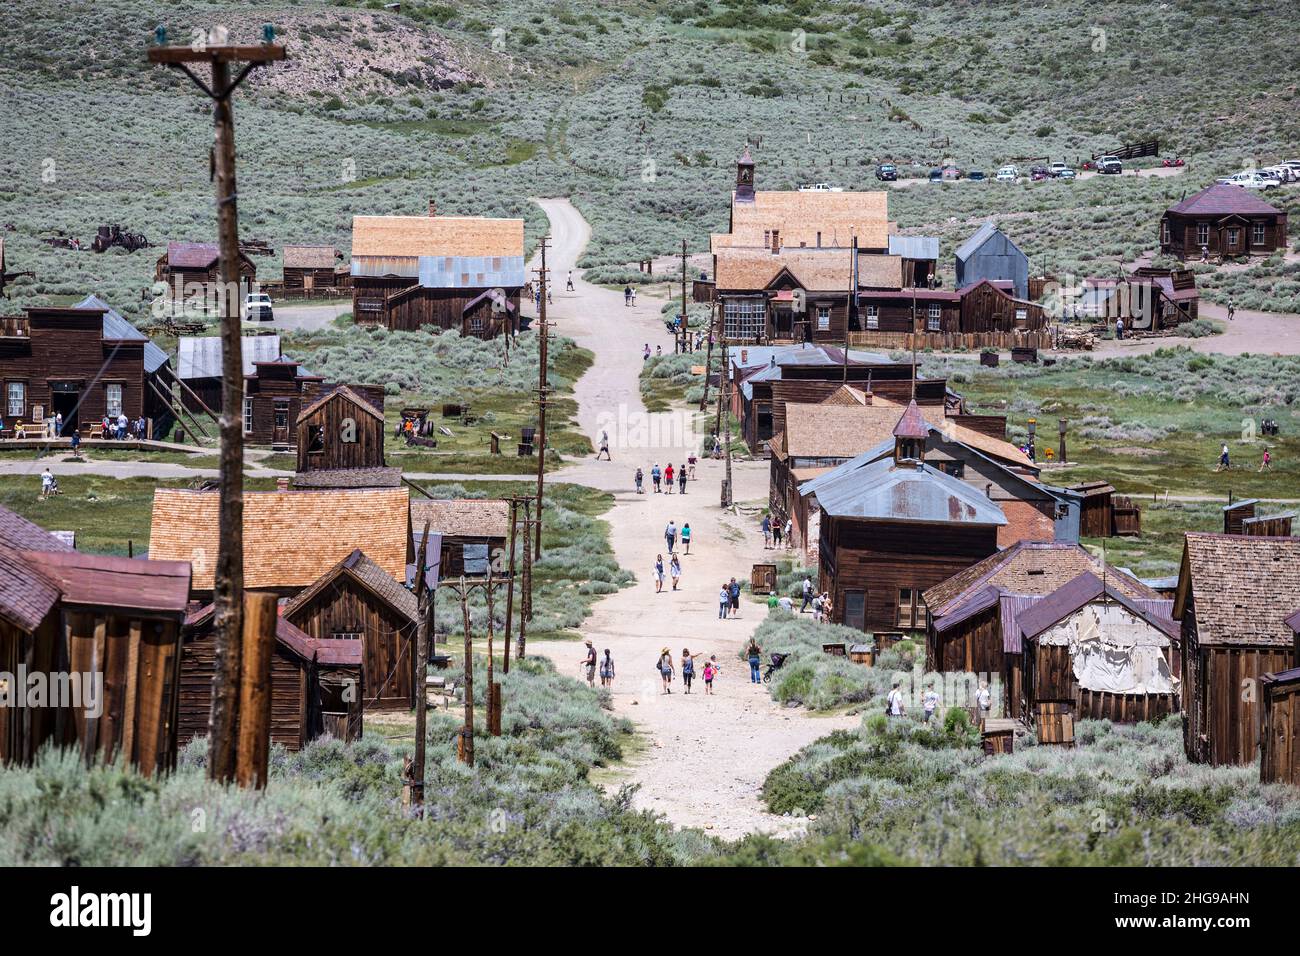 Bodie, California, USA - July 6, 2015:  Groups of summer tourists visiting Bodie ghost town in California's Bodie State Historic Park. Stock Photo